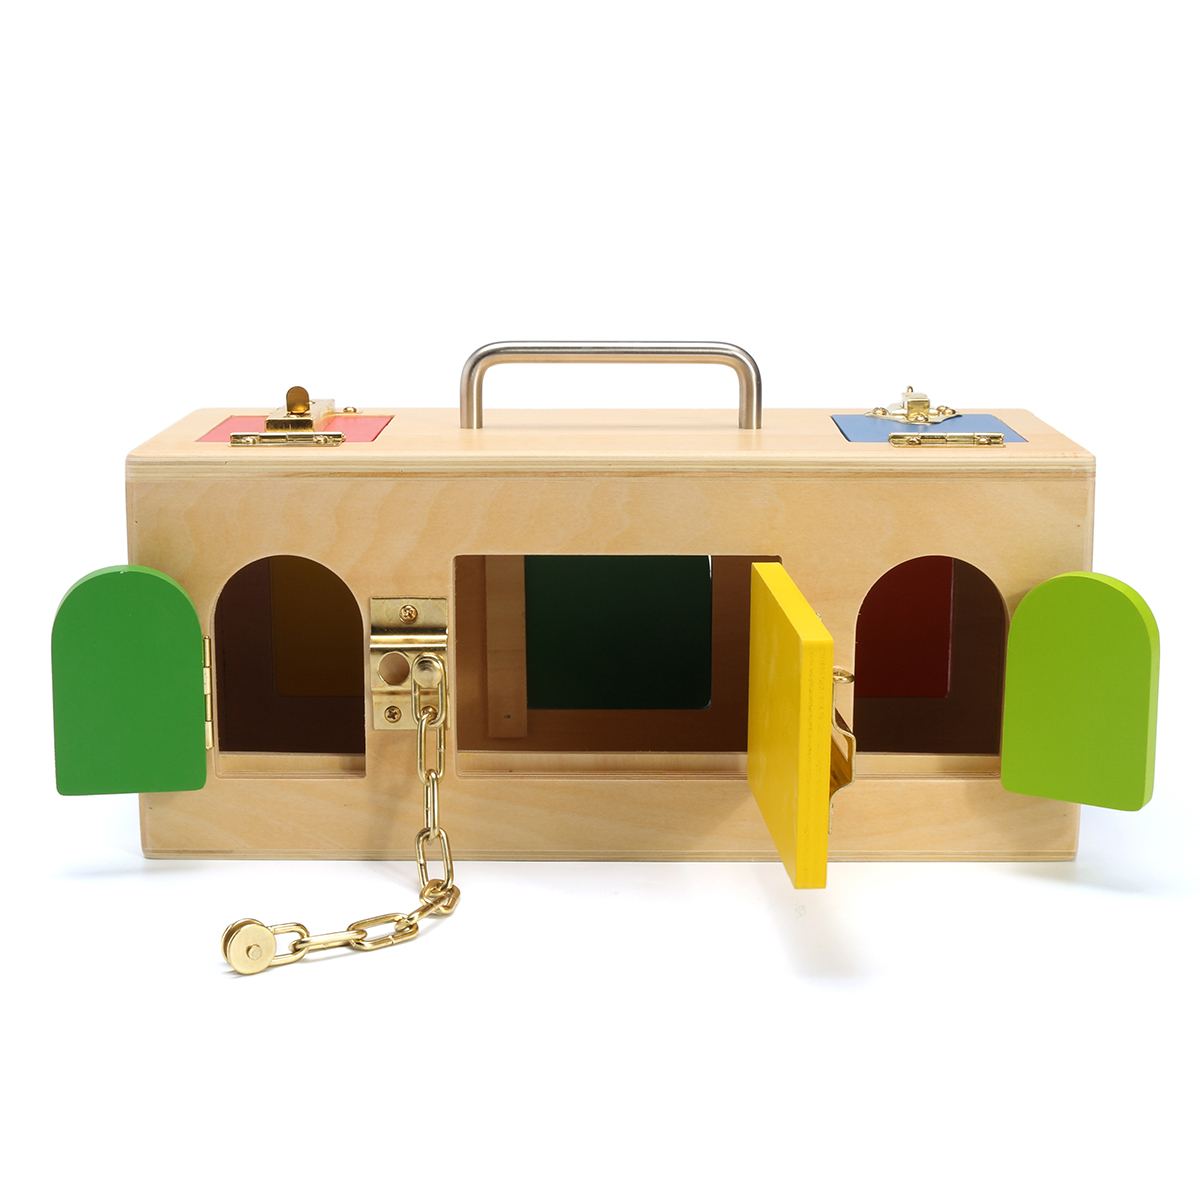 Kids-Life-Skill-Learning-Wooden-Montessori-Practical-Wood-Lock-Box-Educational-Science-Toys-1392942-6